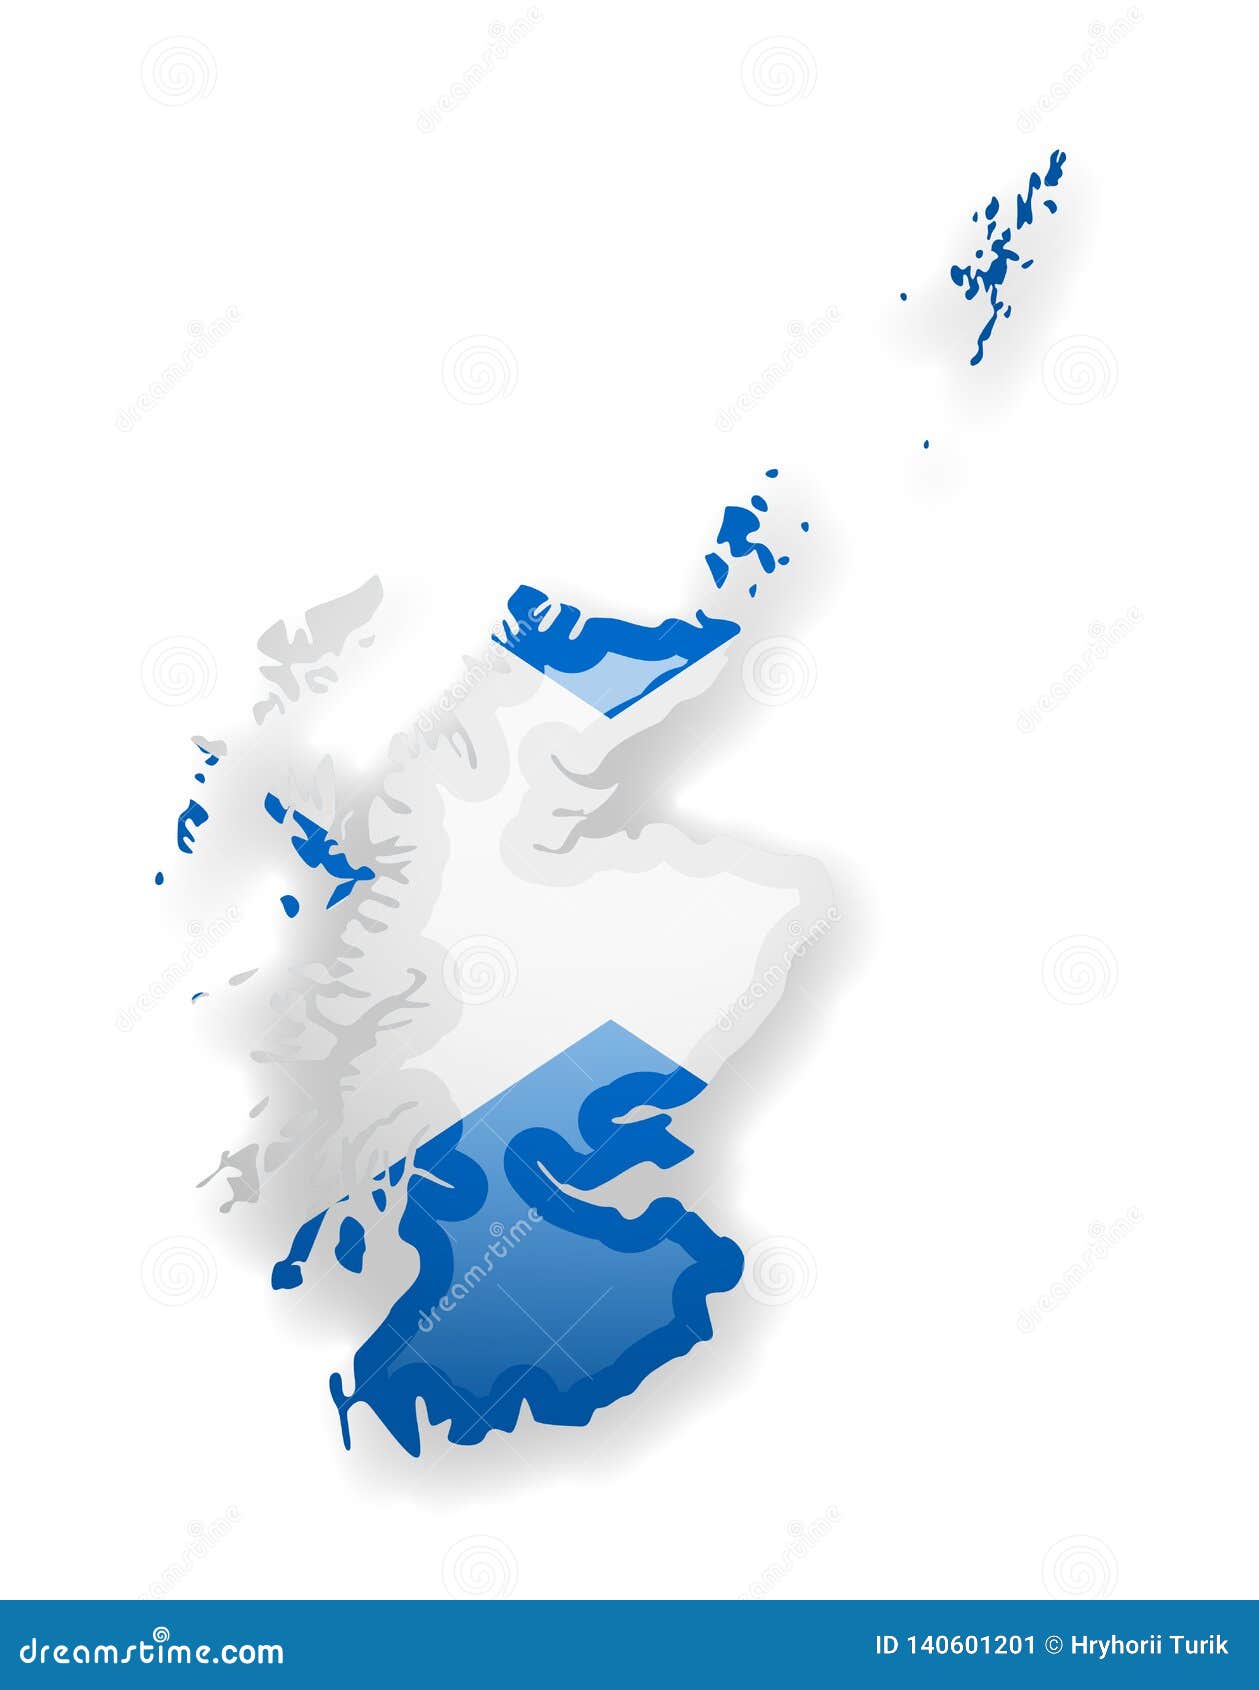 Scotland Flag And Outline Of The Country On A White ...